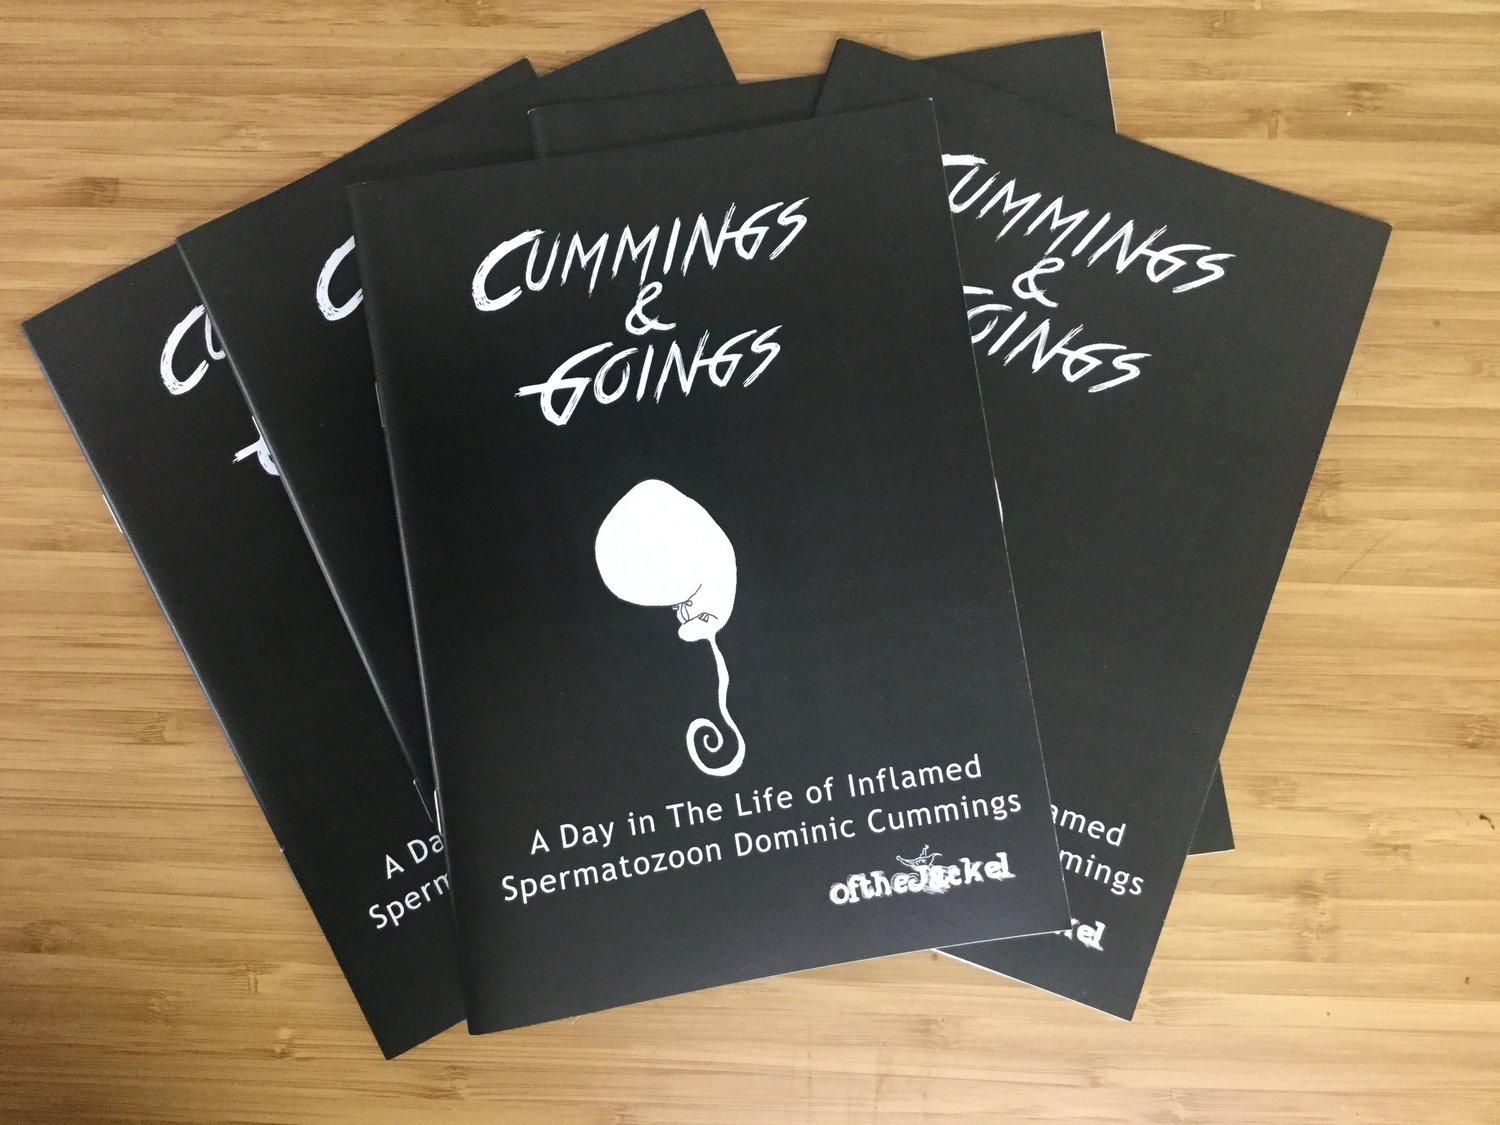 Image of Cummings & Goings.  A Day in The Life of Inflamed Spermatozoon Dominic Cummings Comic